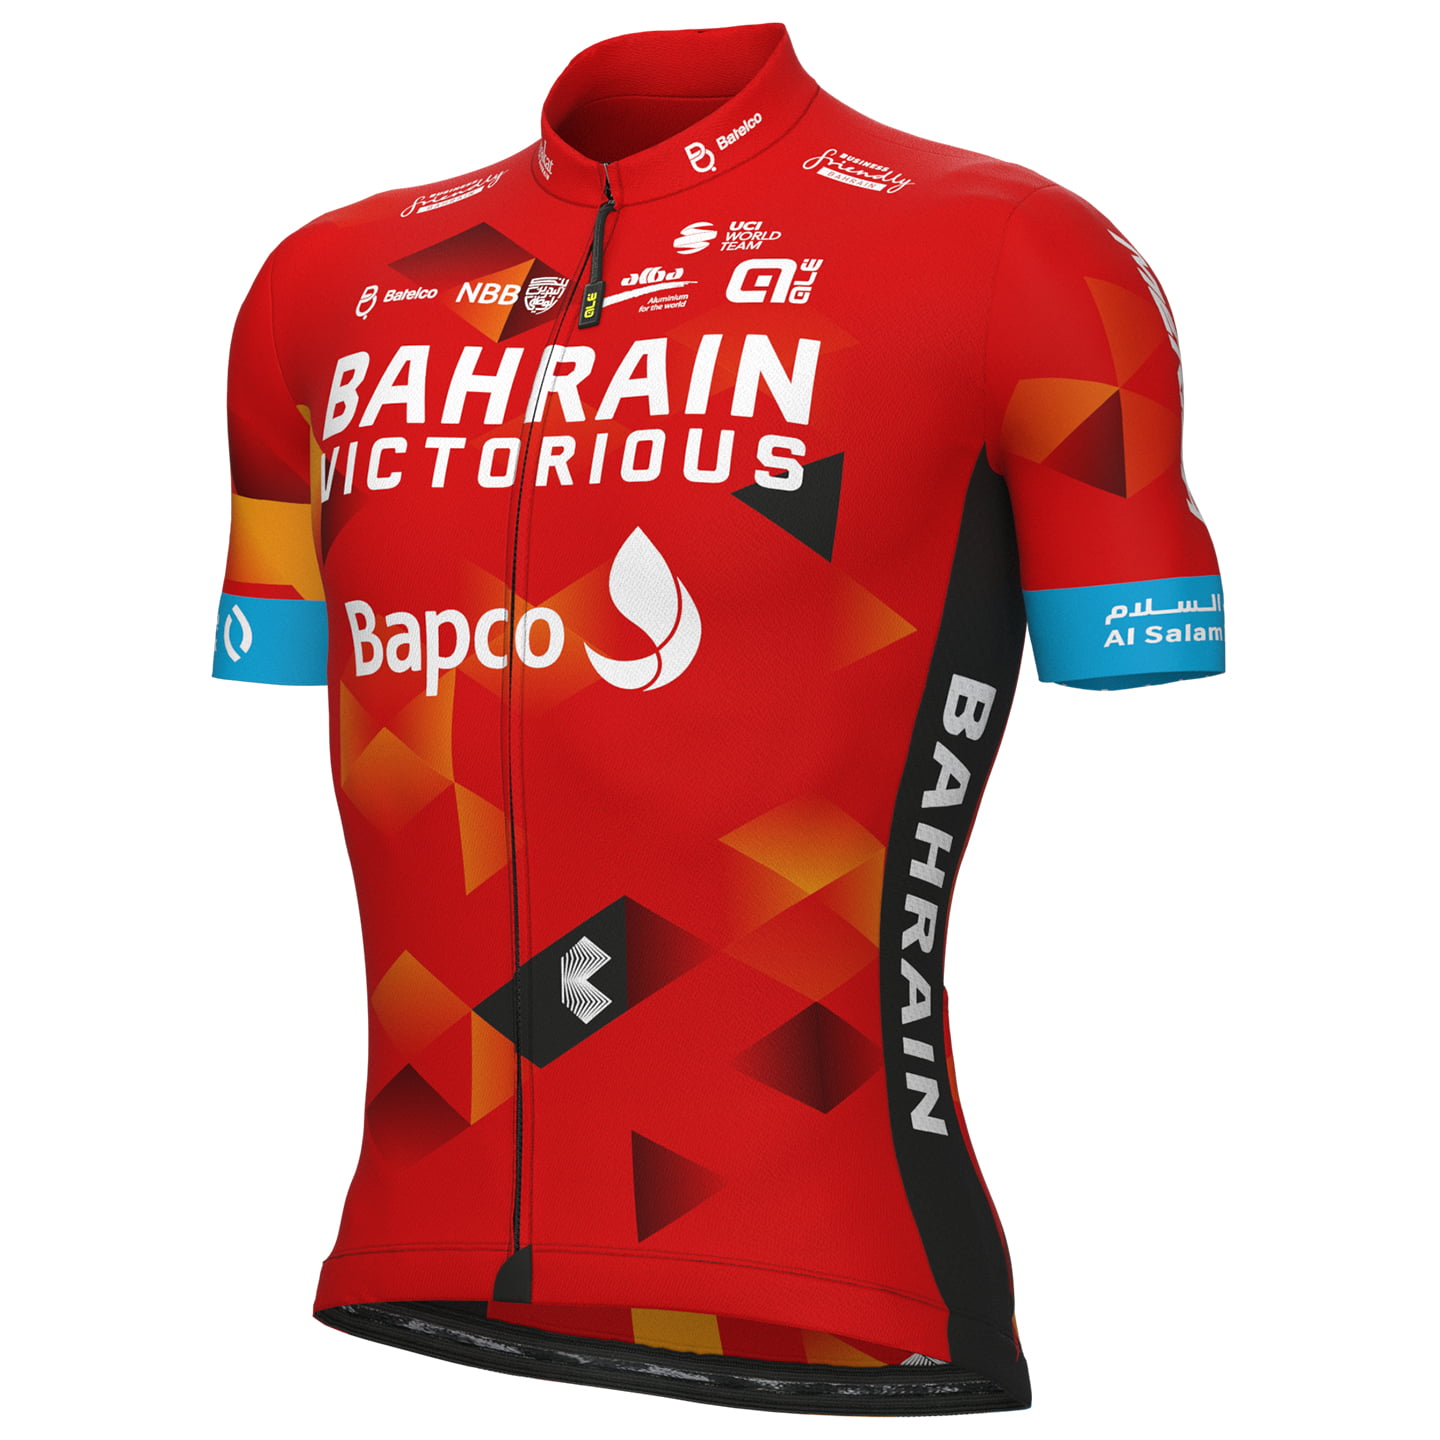 BAHRAIN - VICTORIOUS 2022 Short Sleeve Jersey, for men, size L, Cycling shirt, Cycle clothing